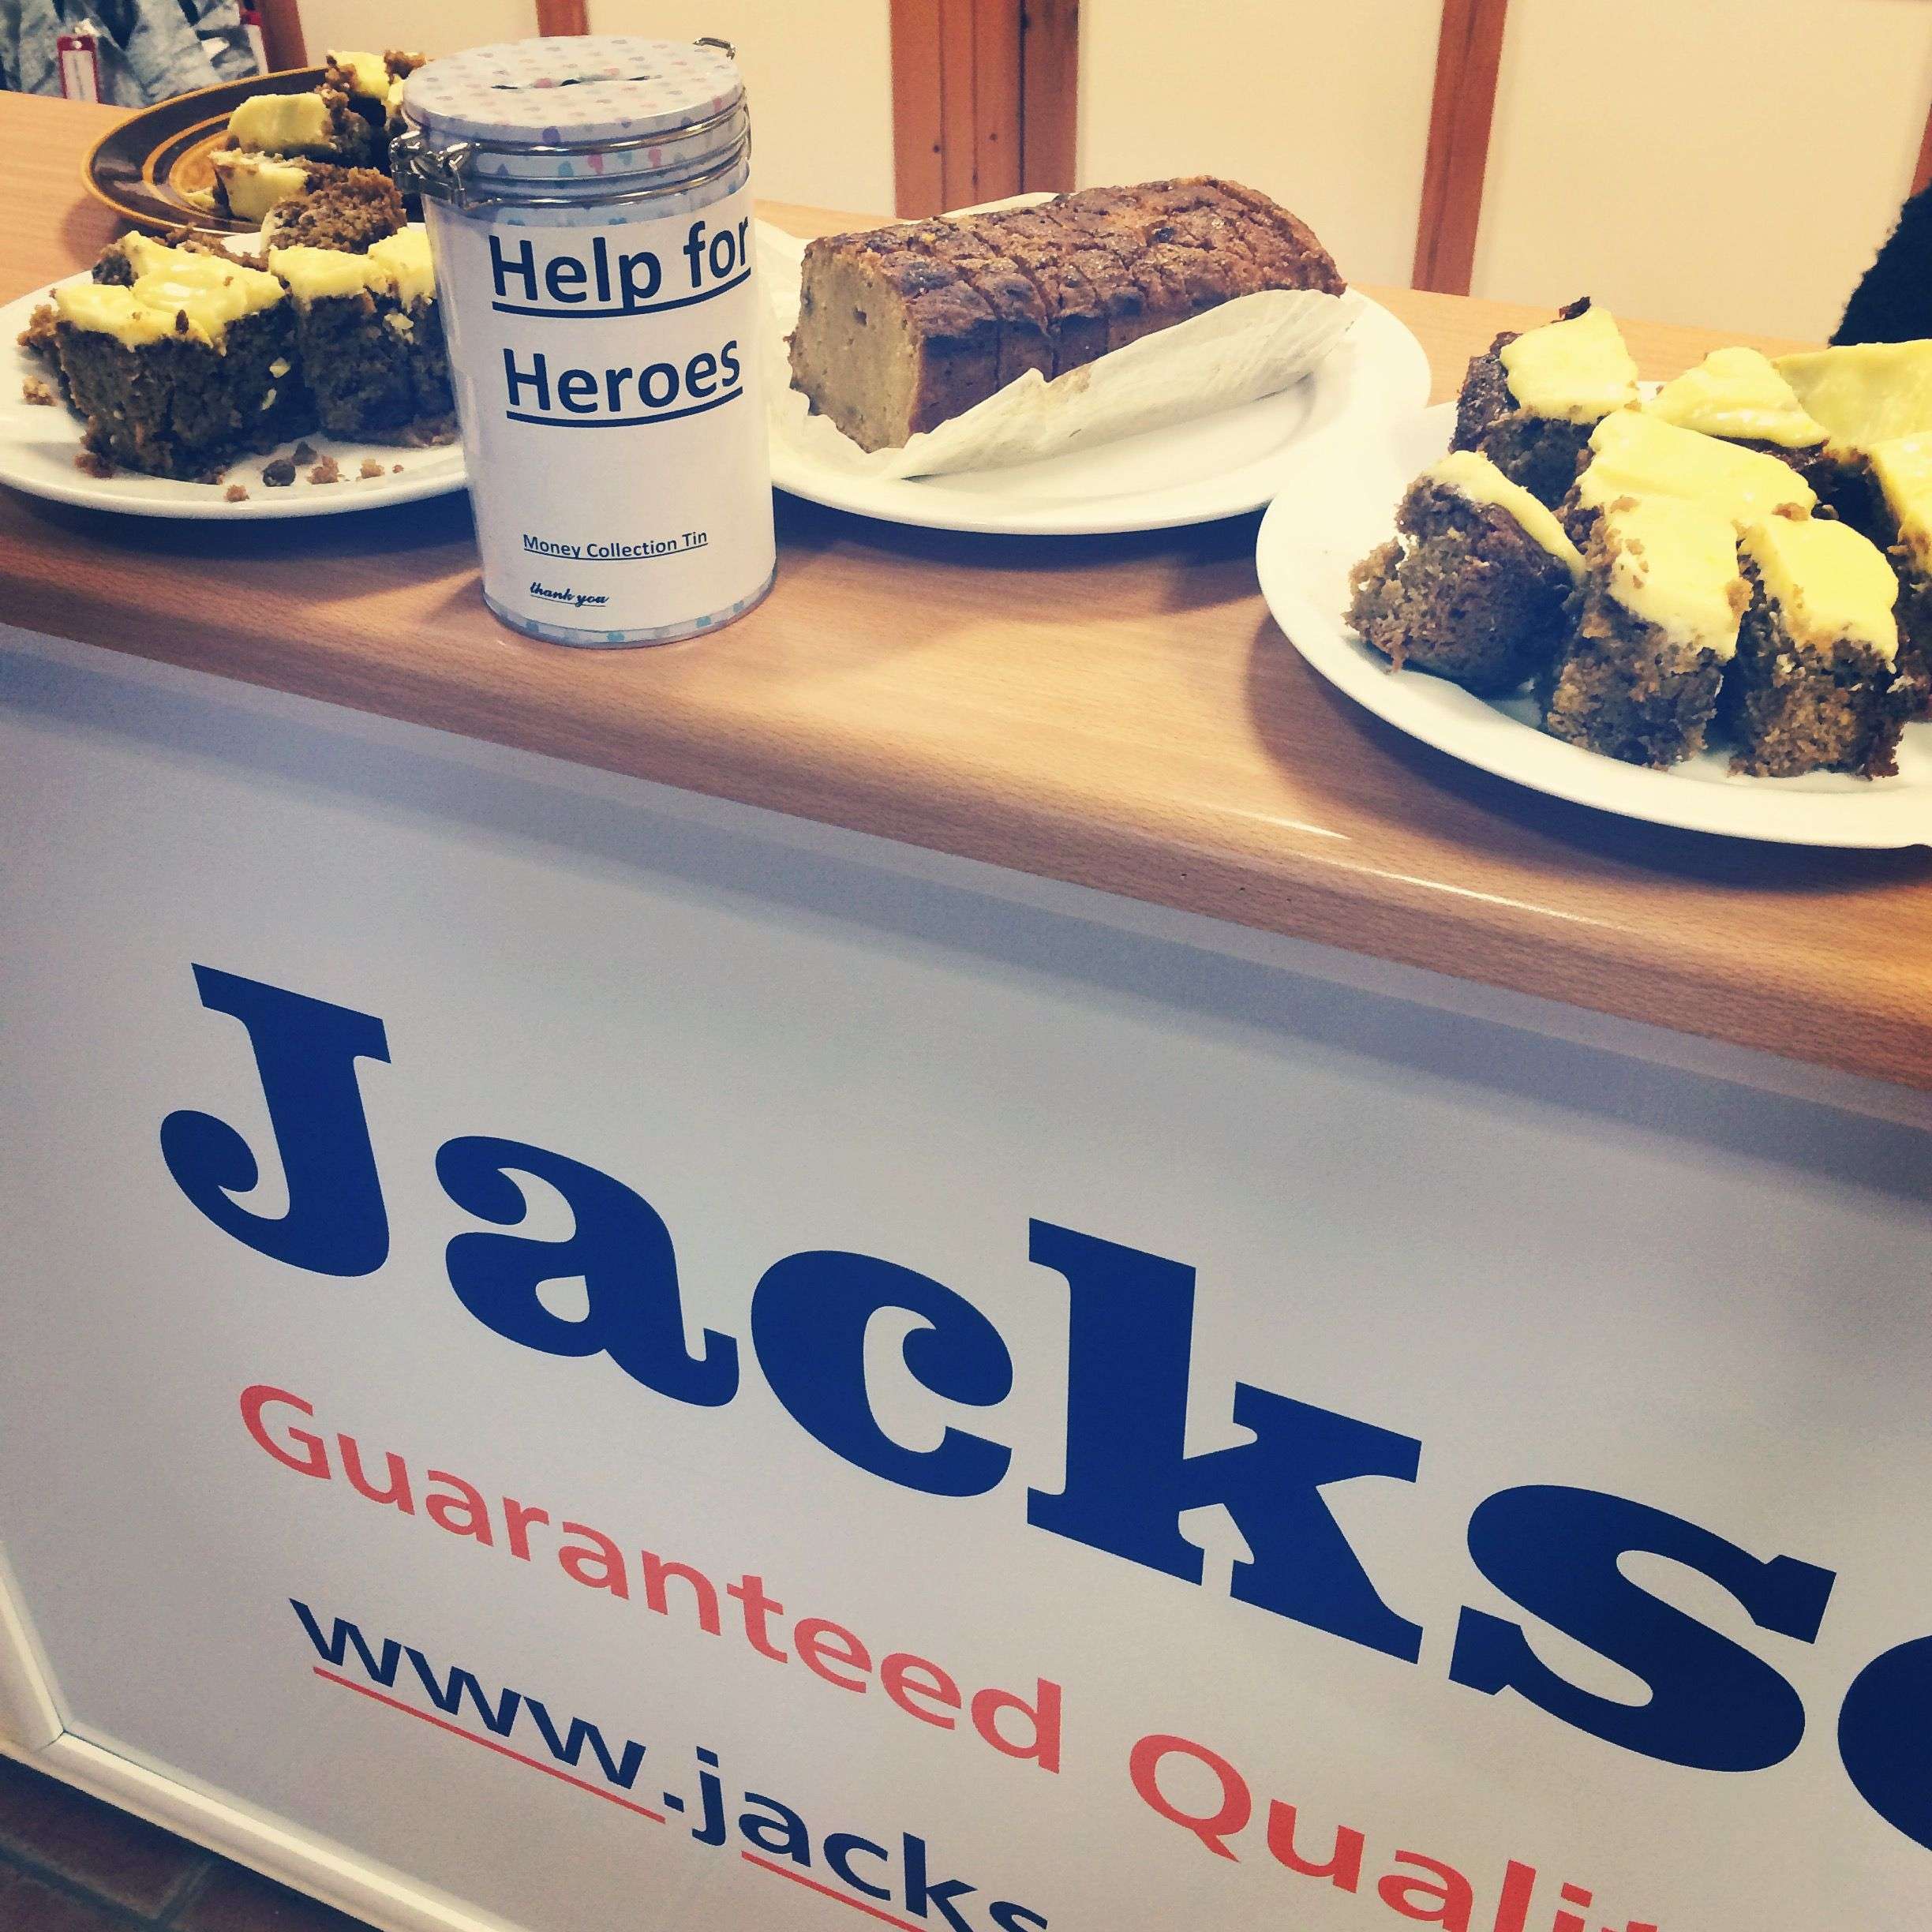 We are selling baked pumpkin goods at Jacksons HQ with the donations ...